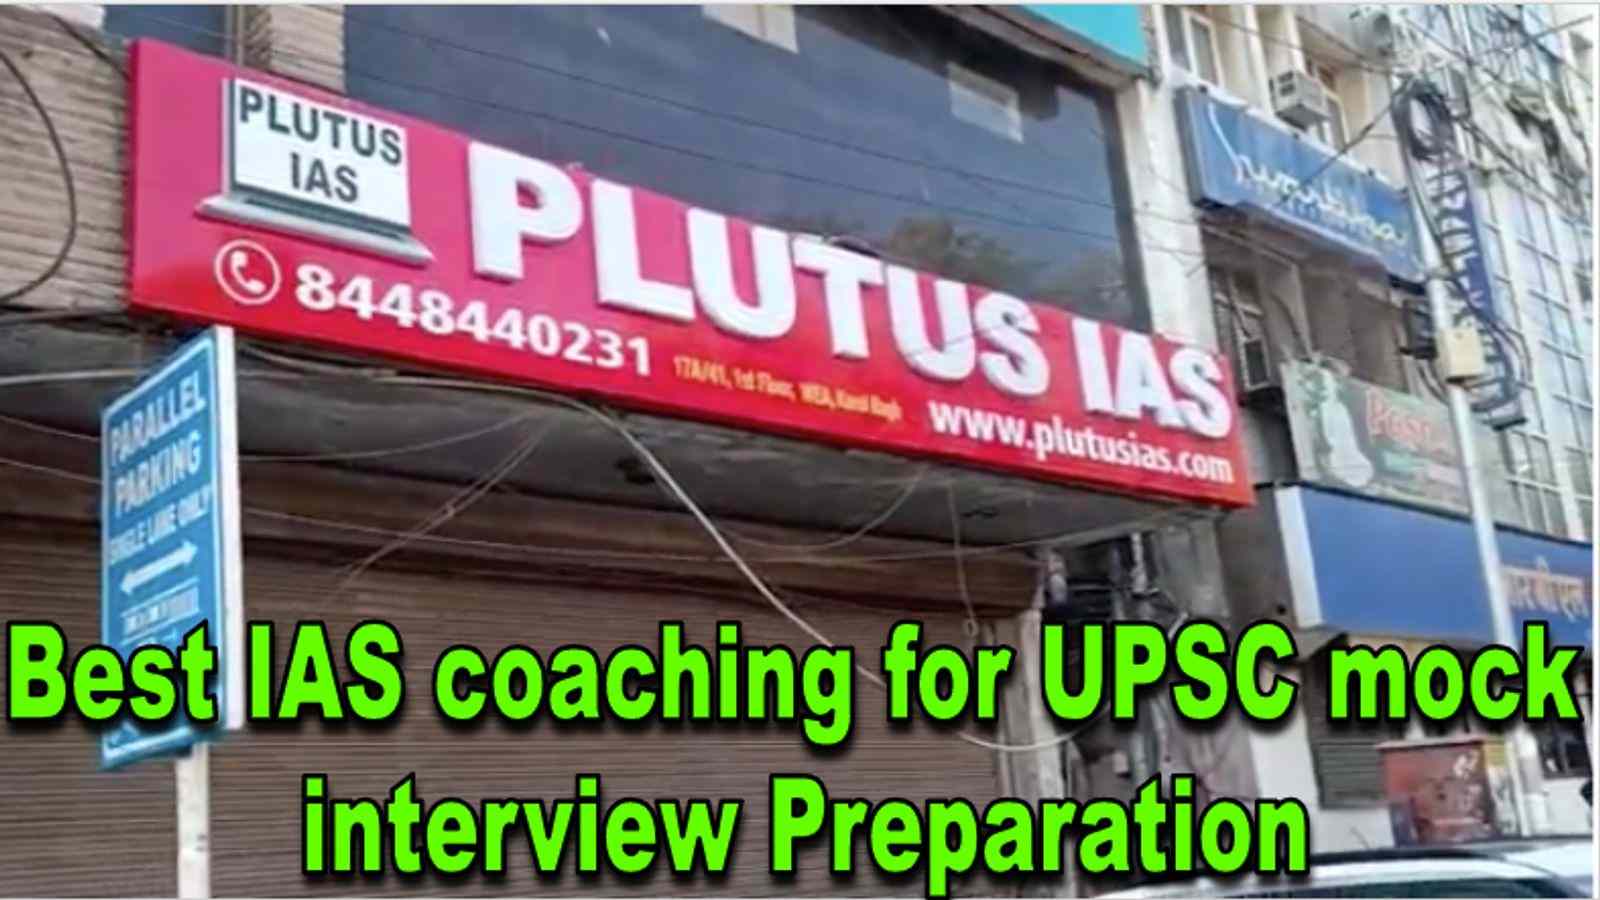 Best IAS Coaching for UPSC Mock Interview preparation